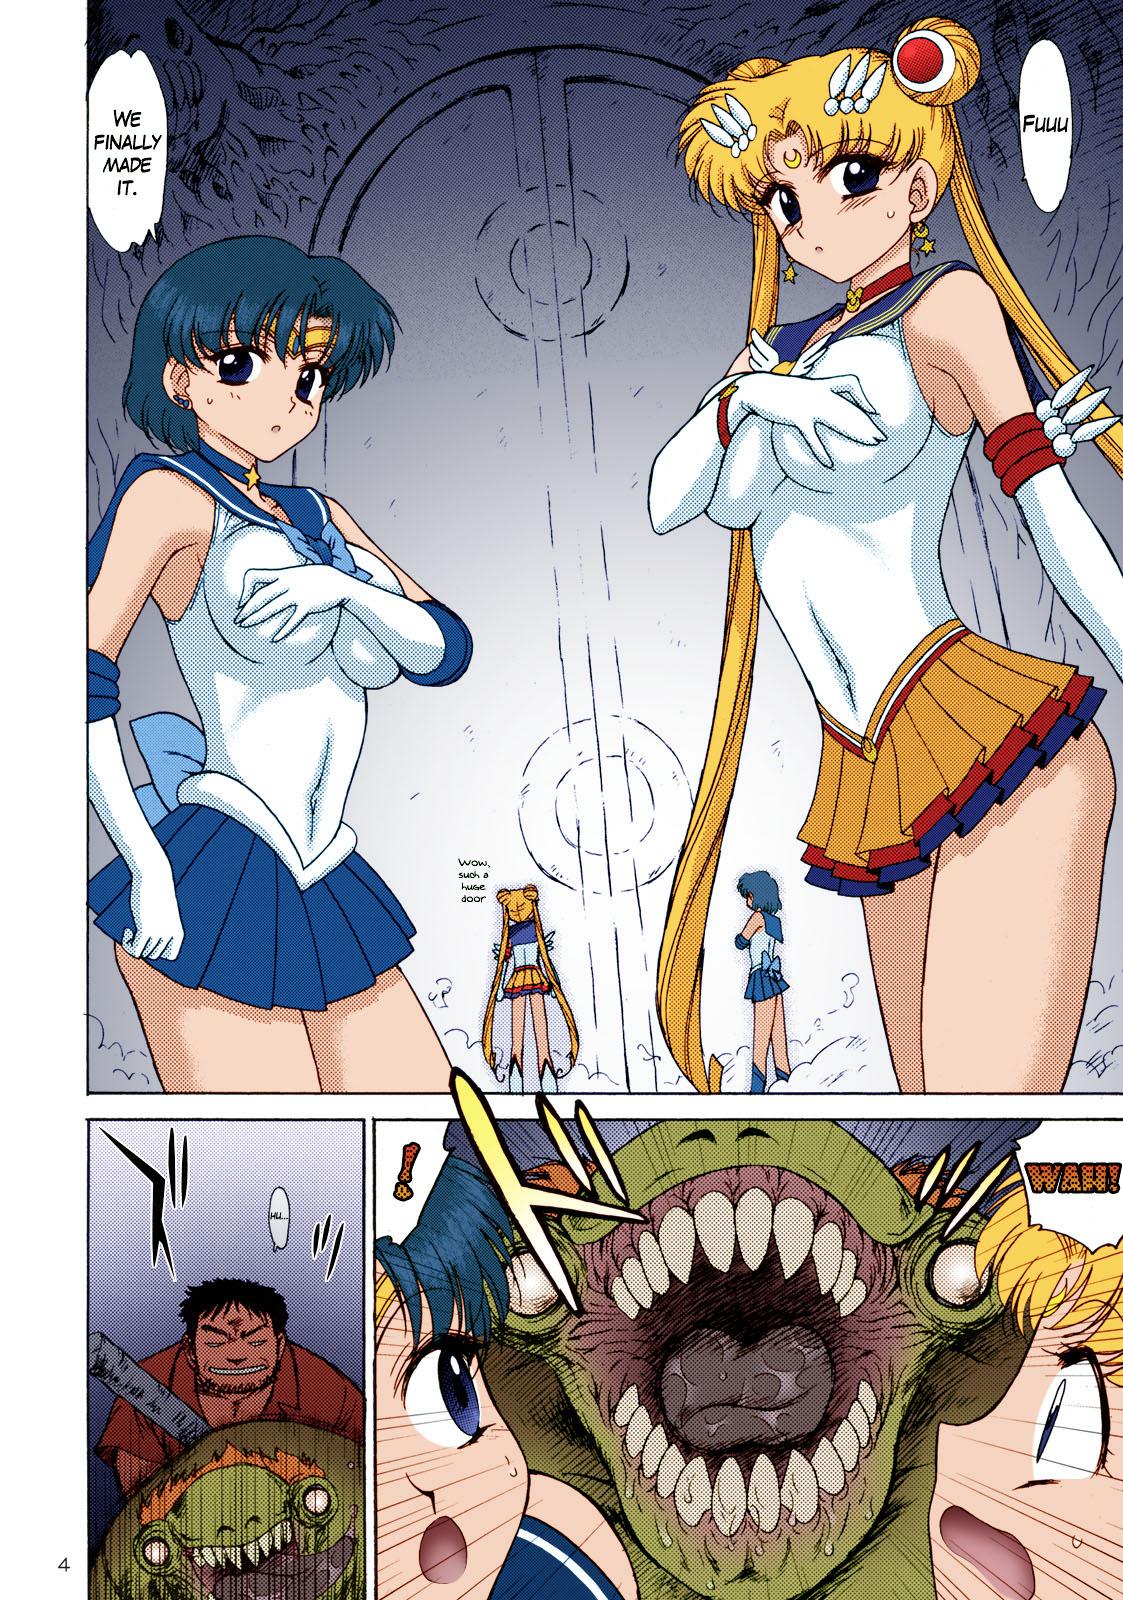 Fit DARK BLUE MOON - Sailor moon Doggystyle - Page 3